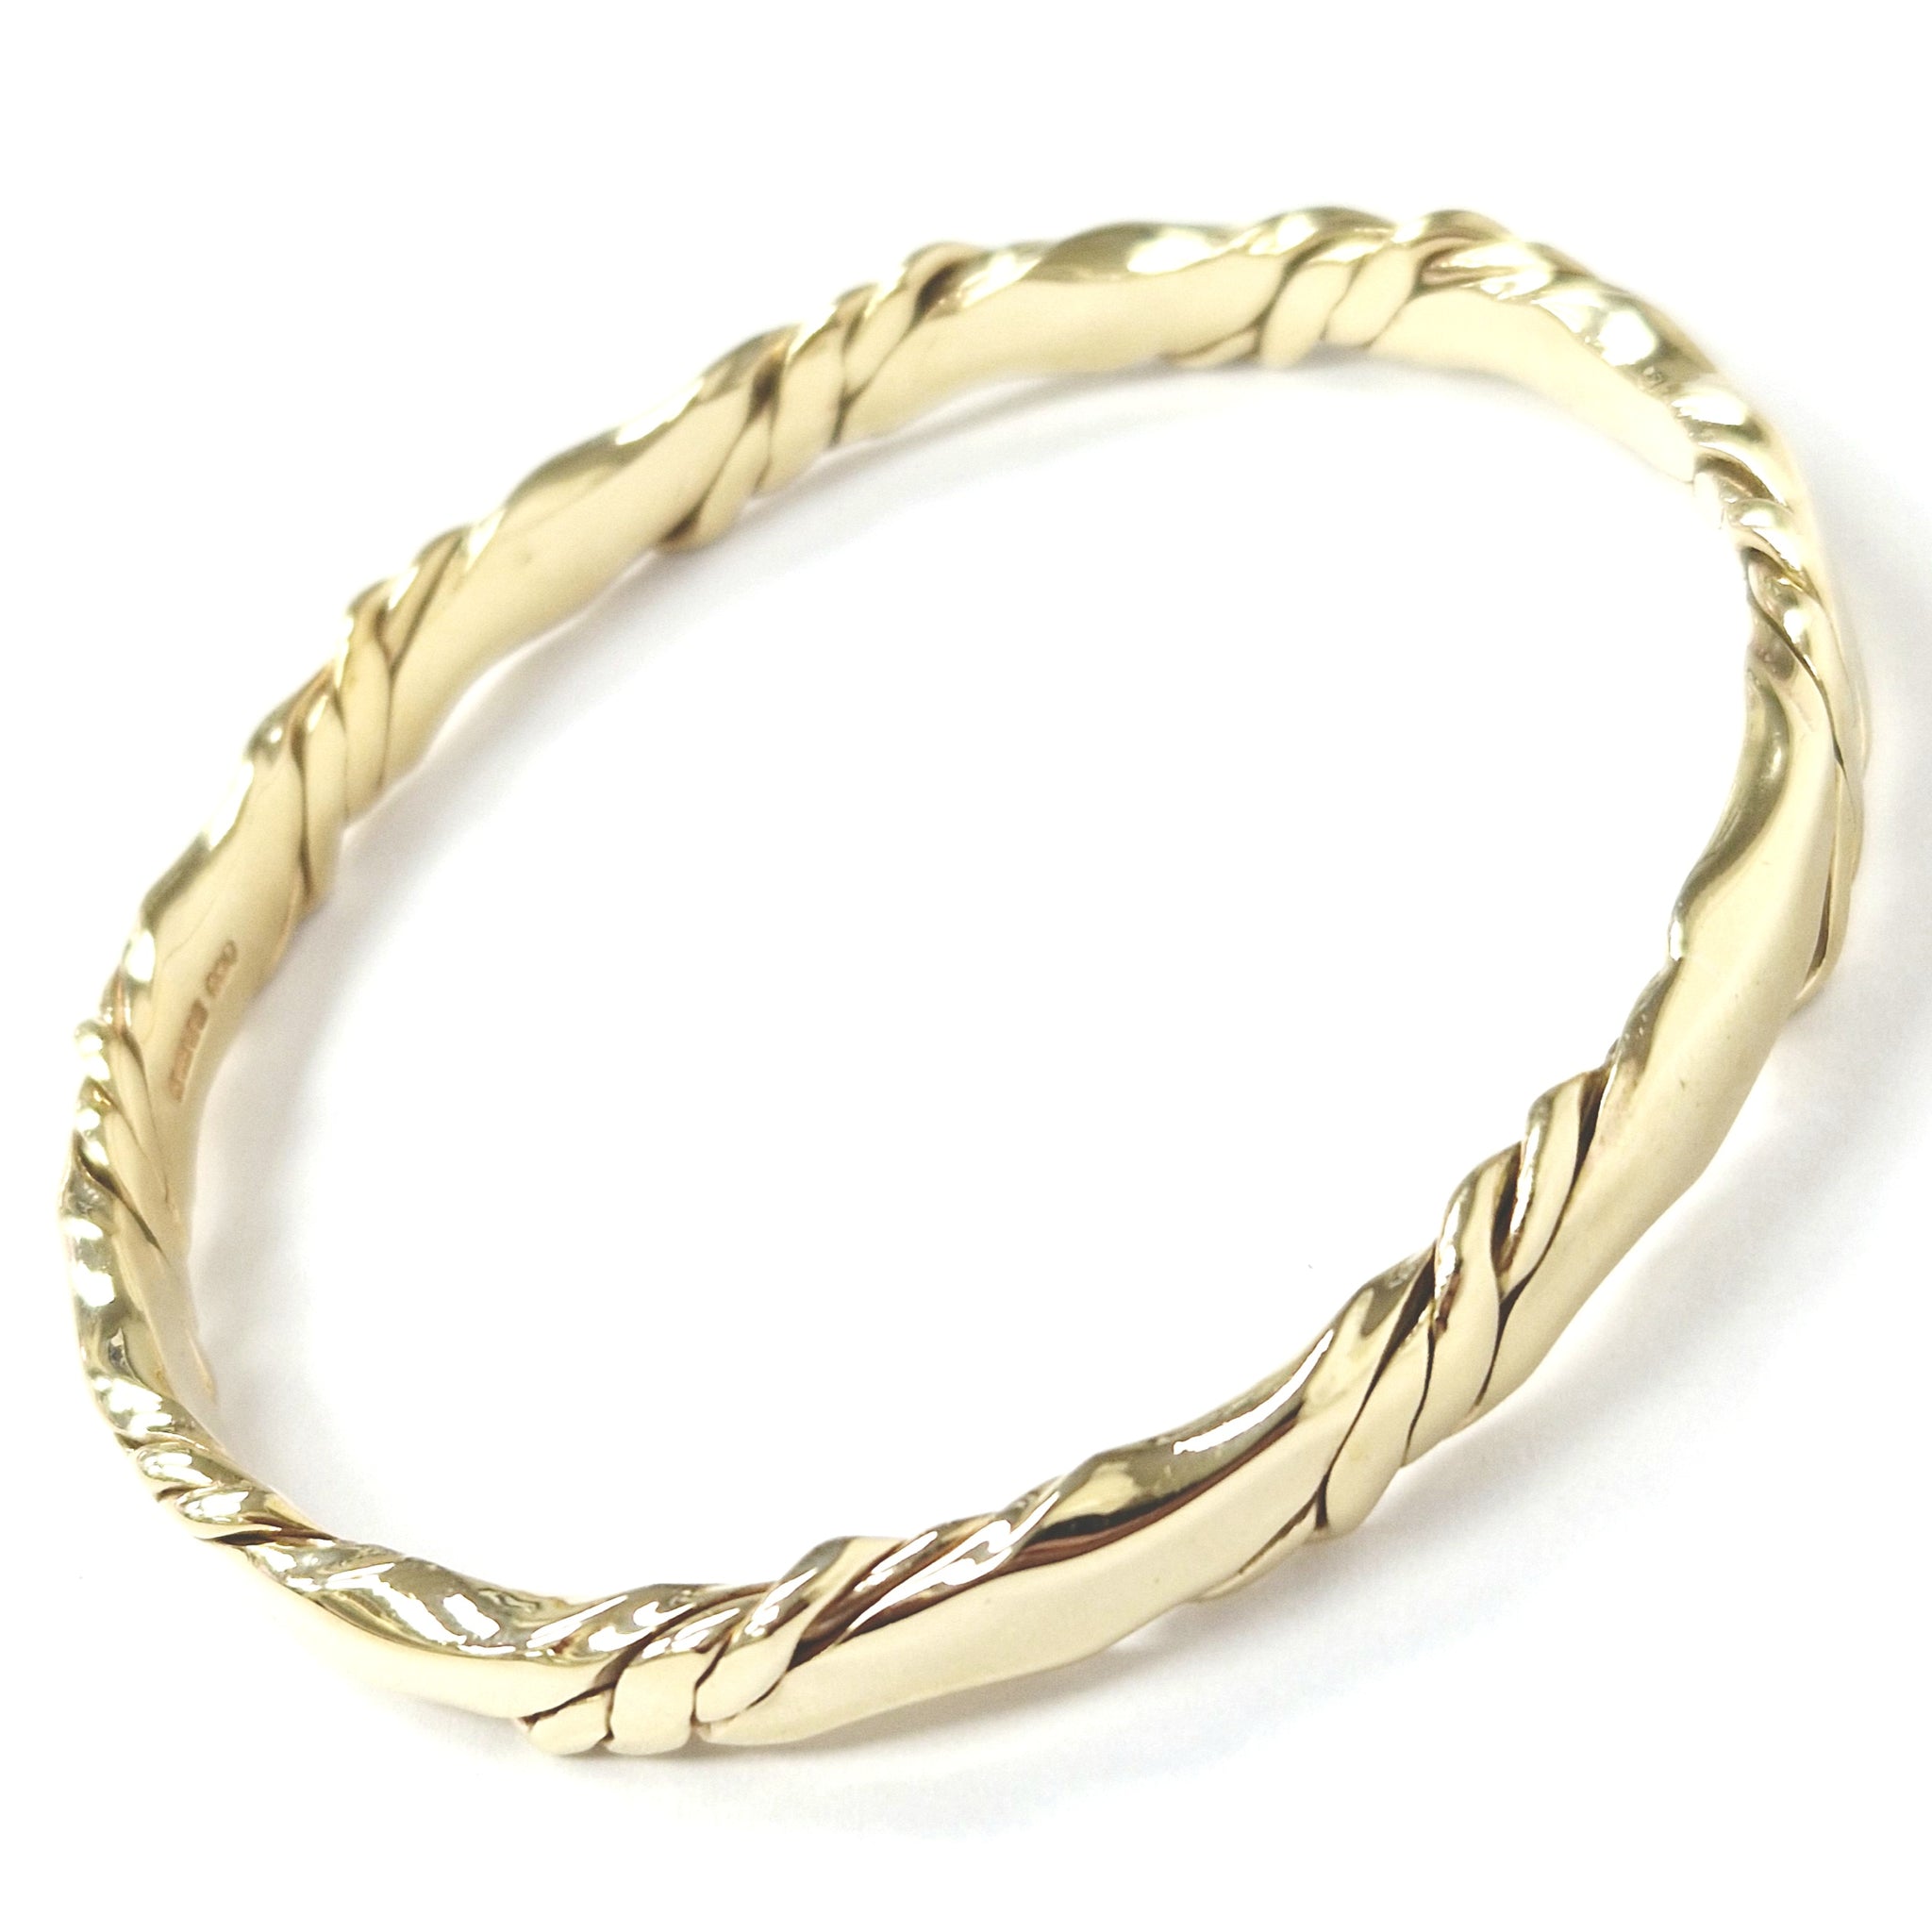 Women's Yellow Gold Slave Bracelet with Links 36710030030 36710030030